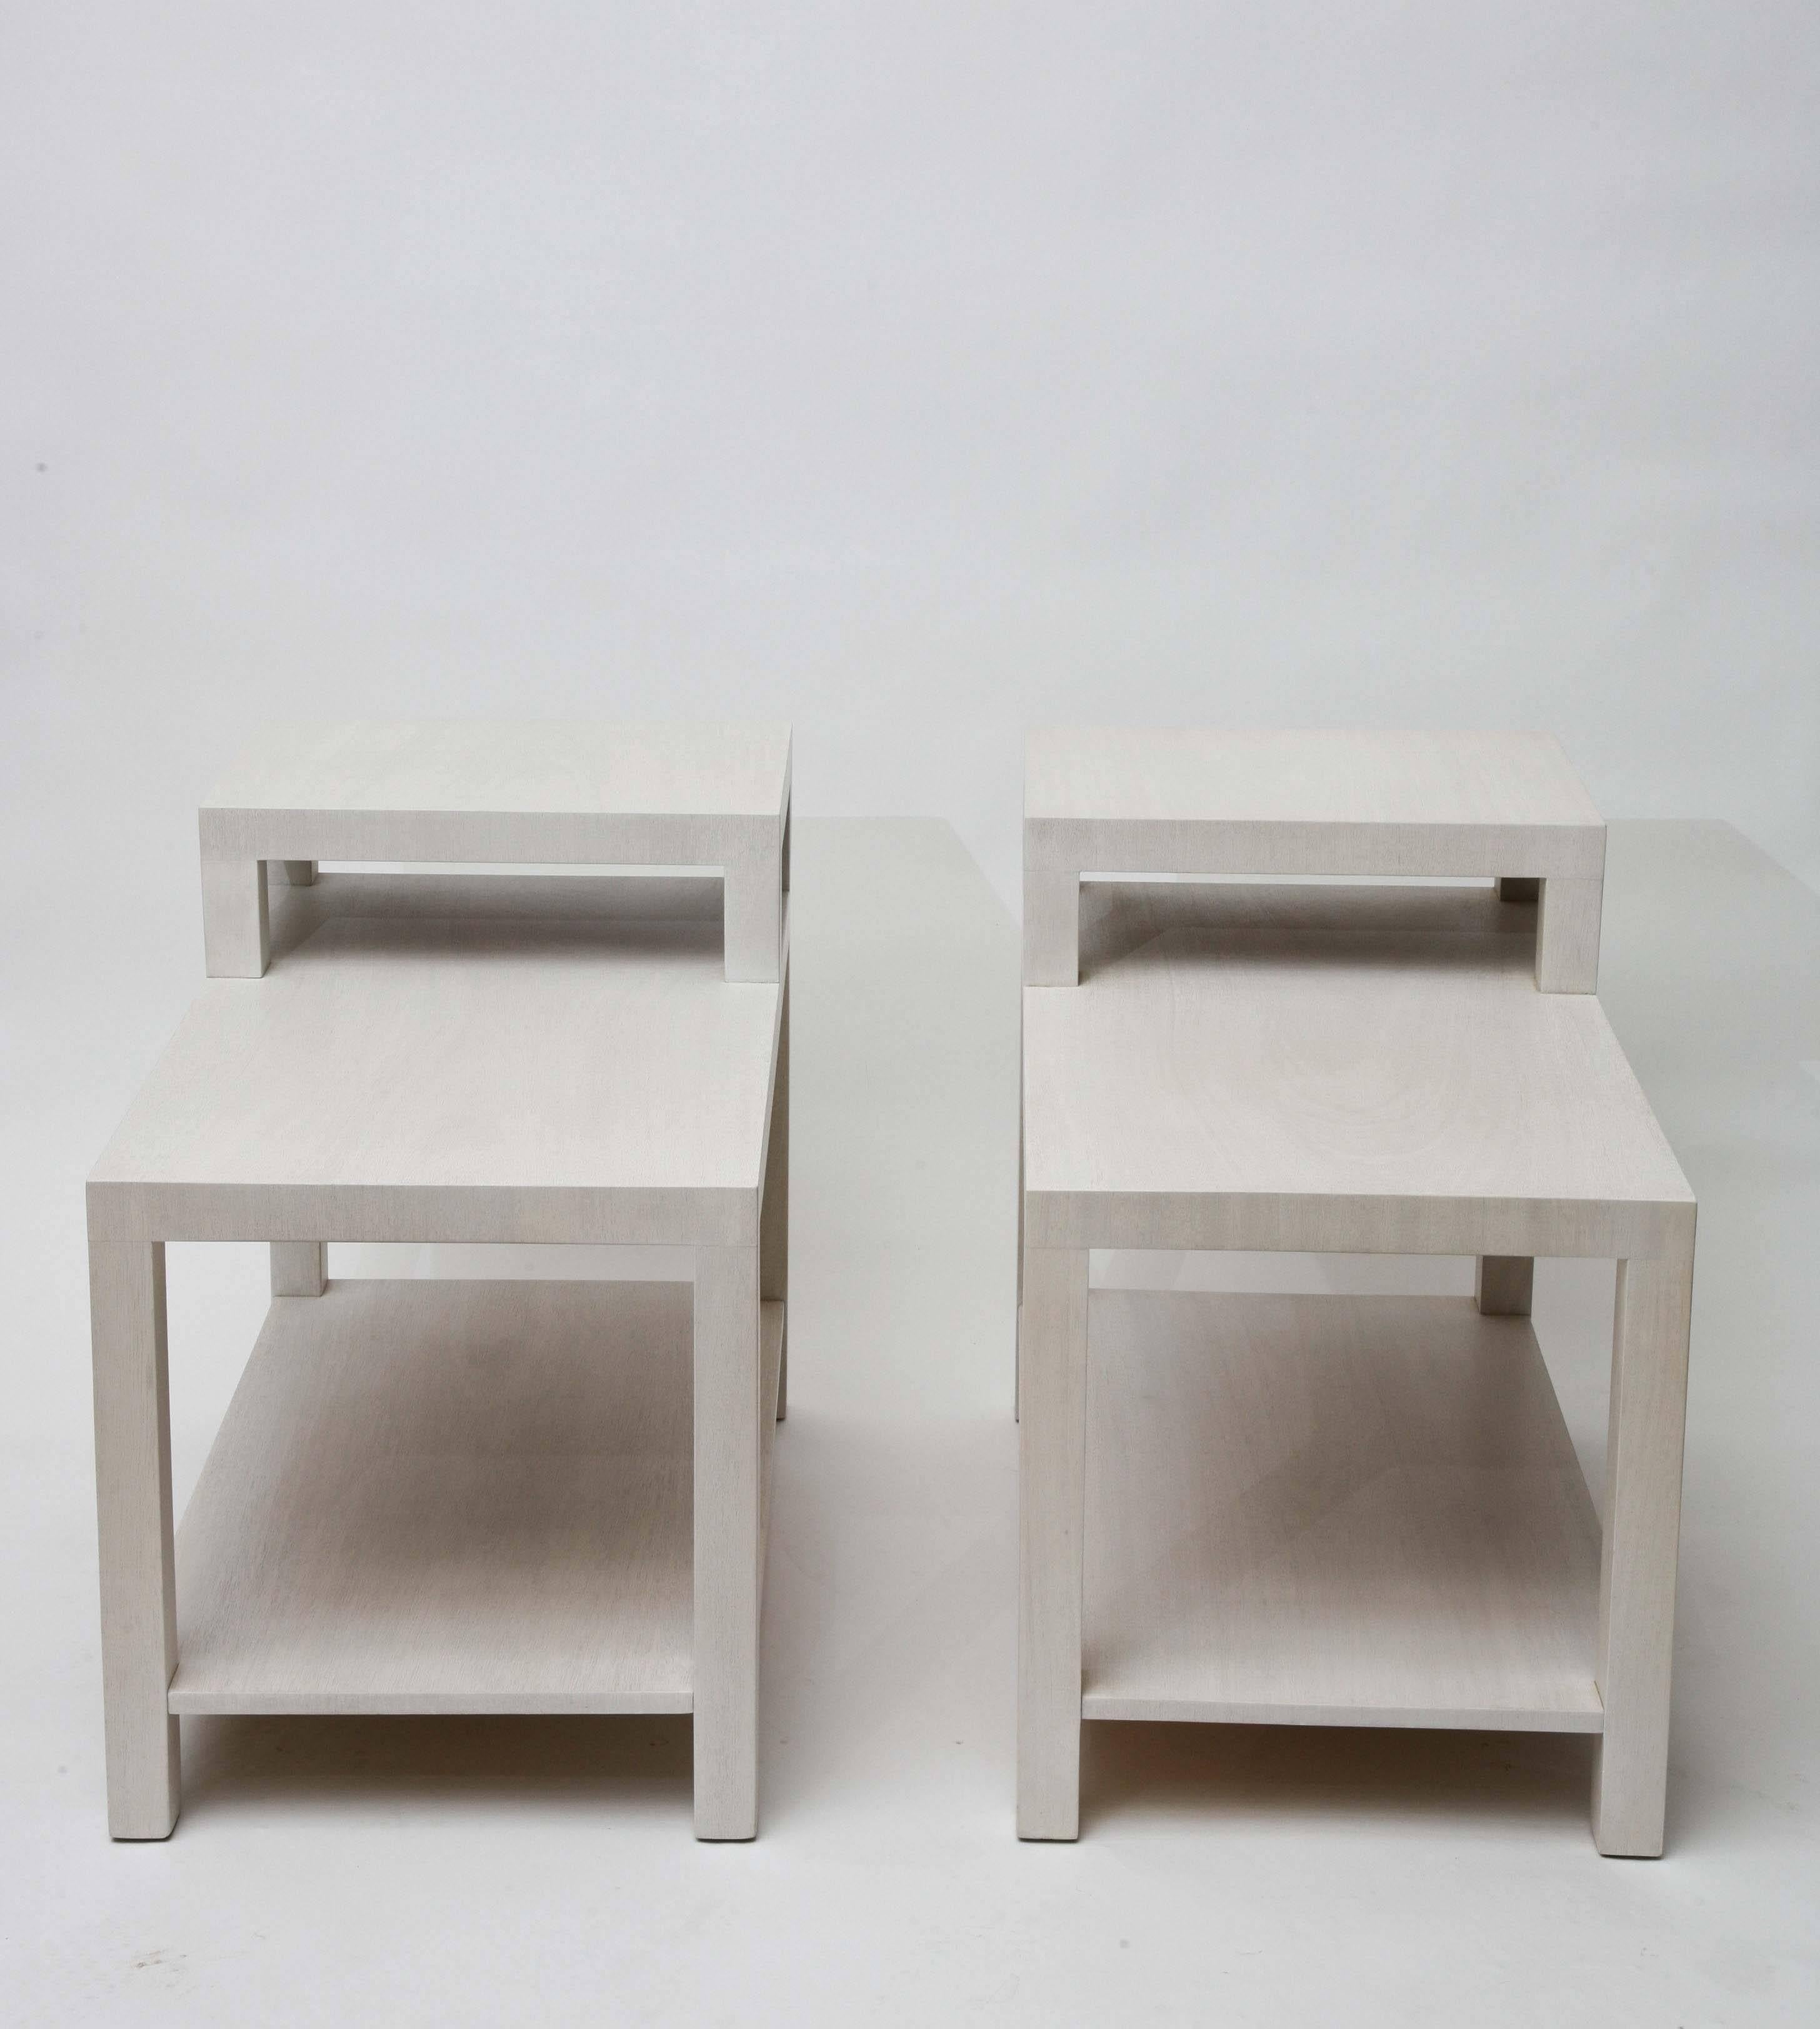 Stunning custom-bleached mahogany stepped end tables or nightstands, designed by T.H. Robsjohn-Gibbings for Widdicomb. Beautifully grained mahogany in dreamy shades of pale cream and whispery grey is sure to put you to sleep with a smile! Stamped to